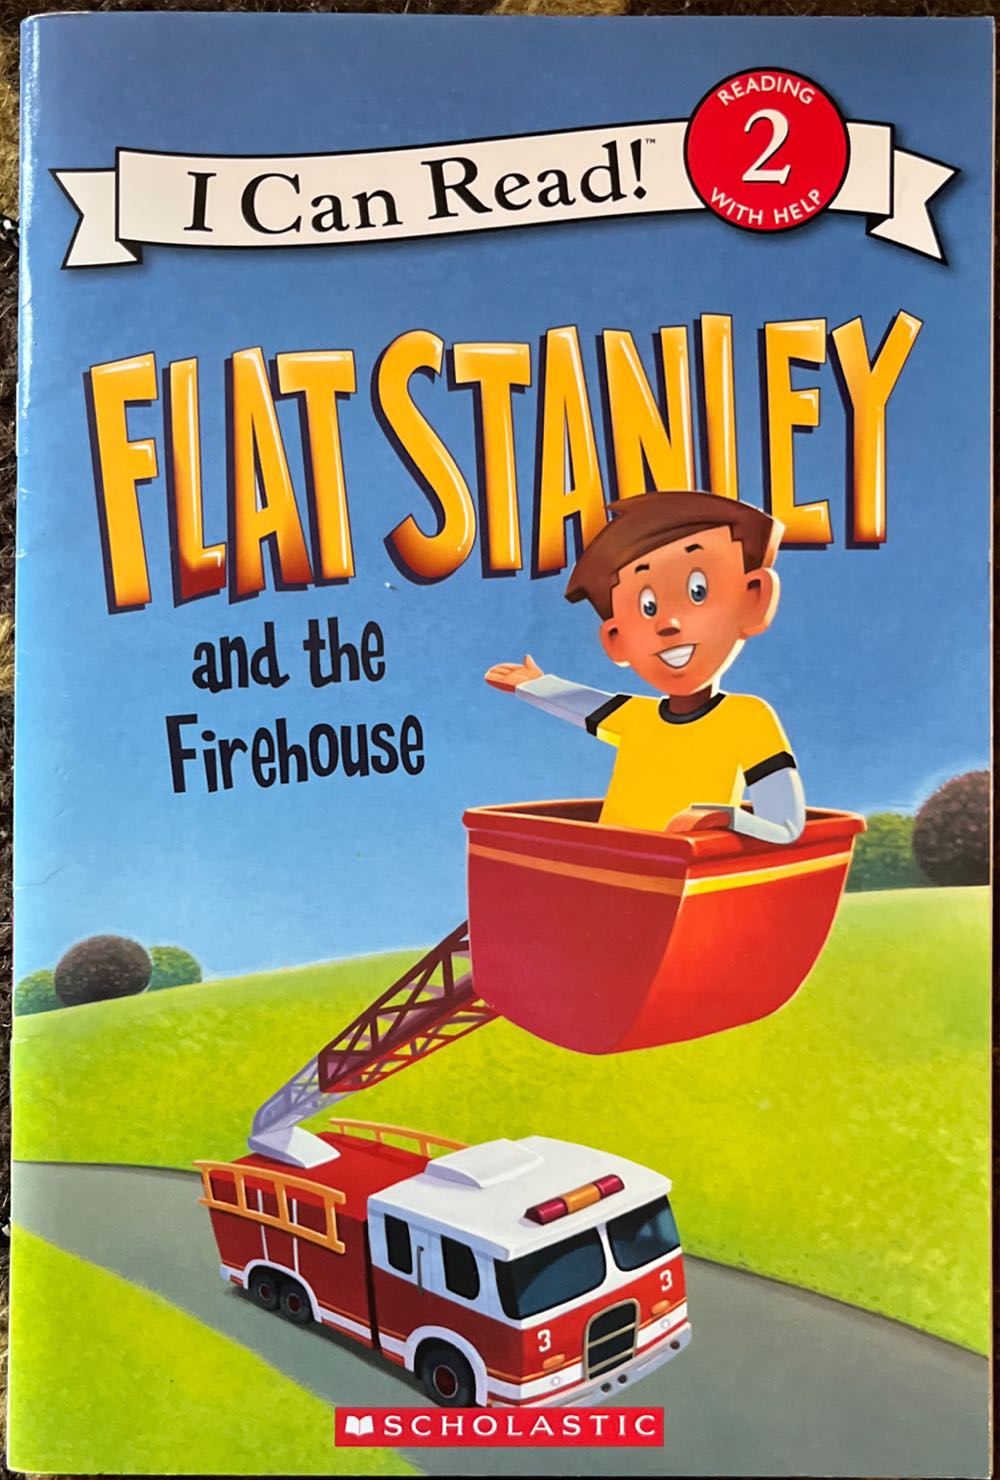 Flat Stanley And The Firehouse - Jeff Brown (Scholastic - Paperback) book collectible [Barcode 9780545402750] - Main Image 4